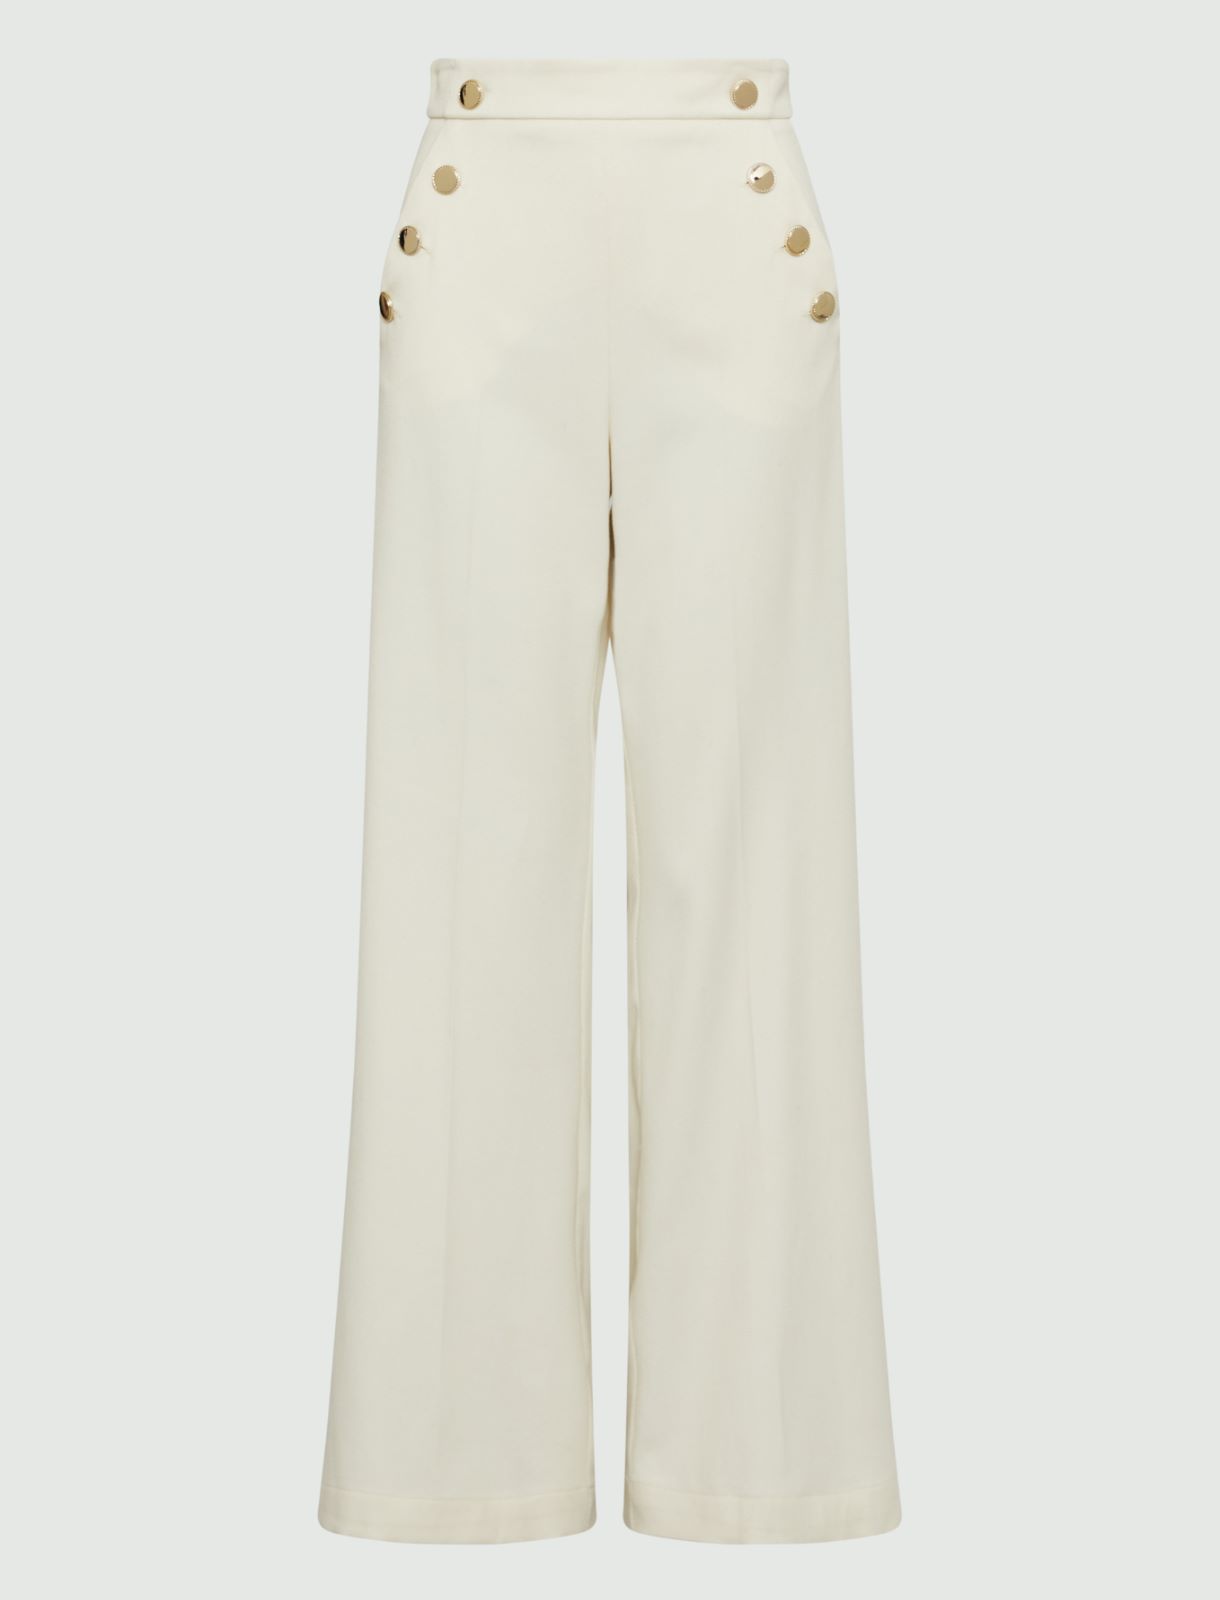 Plt Label Cream Woven Wide Leg Tailored Trousers  PrettyLittleThing